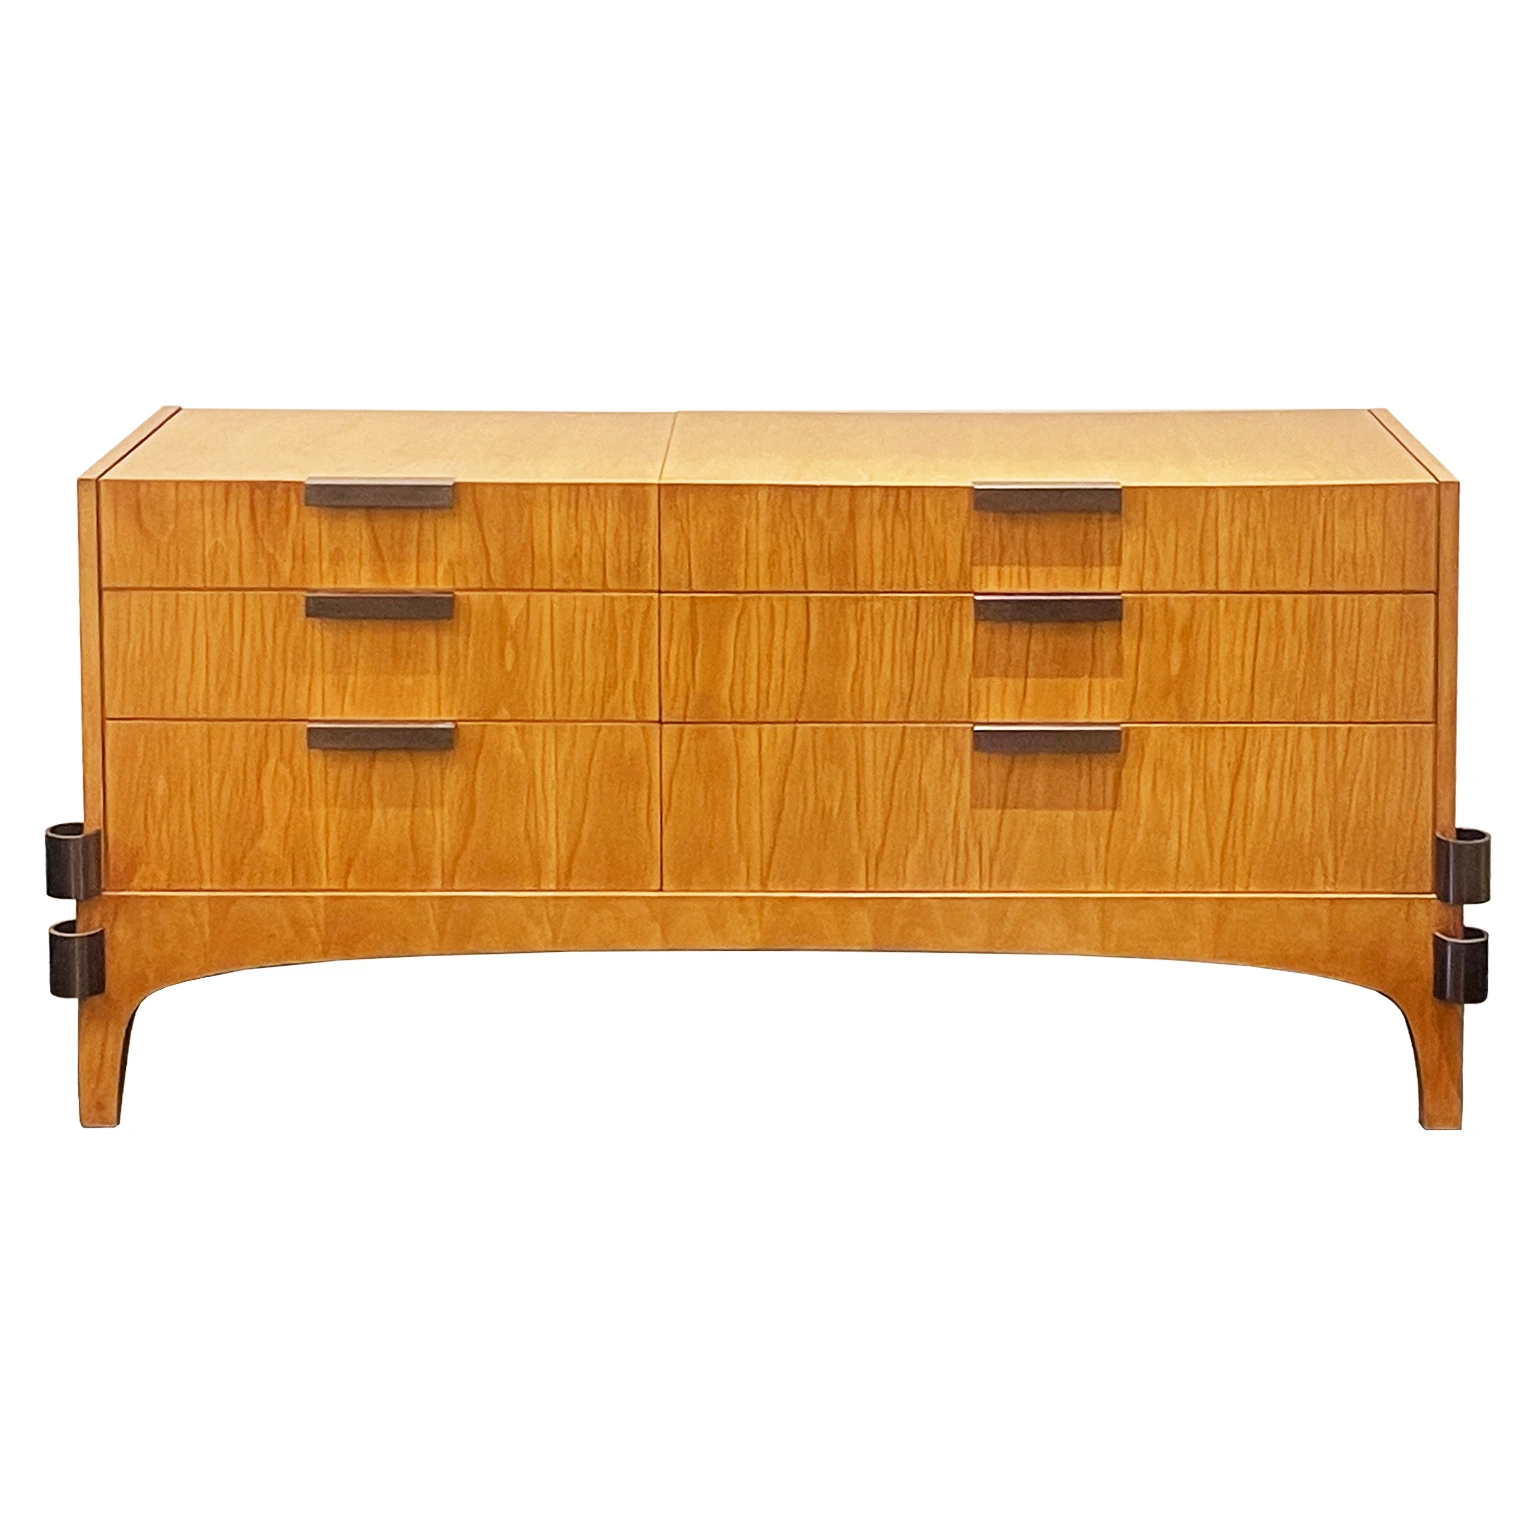 Italian mid-century vintage bar/sideboard crafted with fir wood, features hidden mirrored compartment.